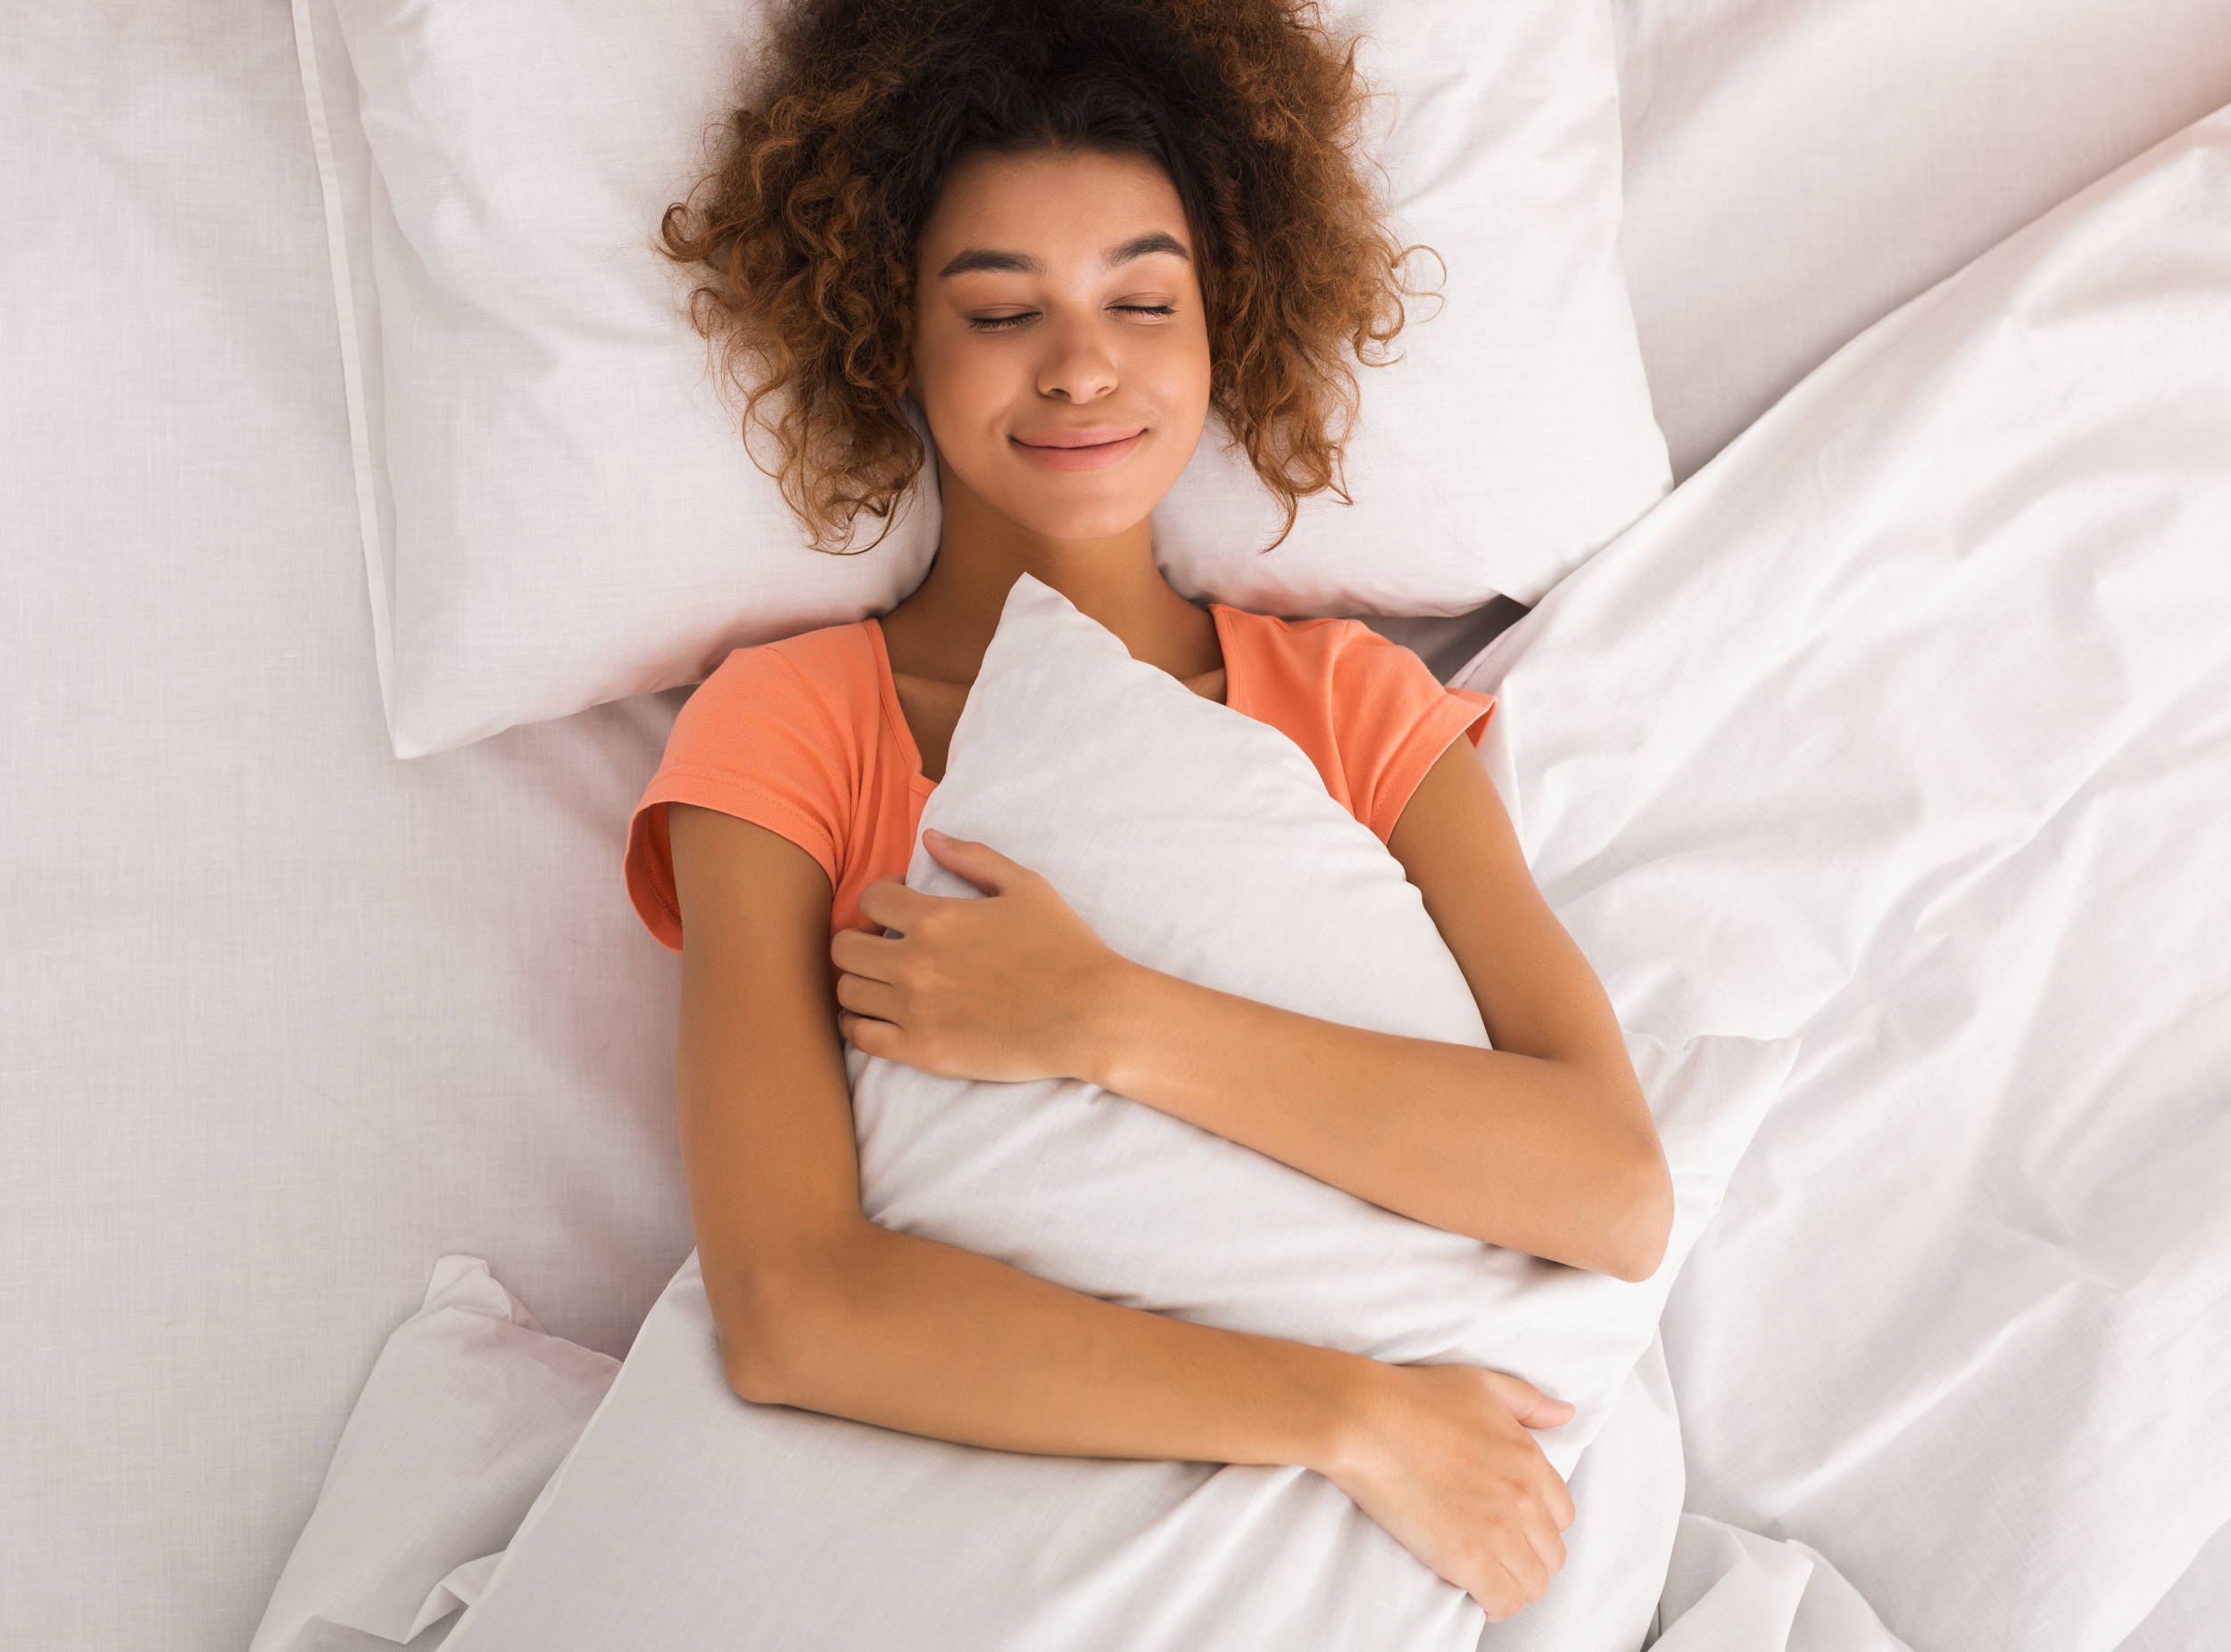 A women in an orange shirt laying down in bed hugging a copper-infused pillow while smiling.